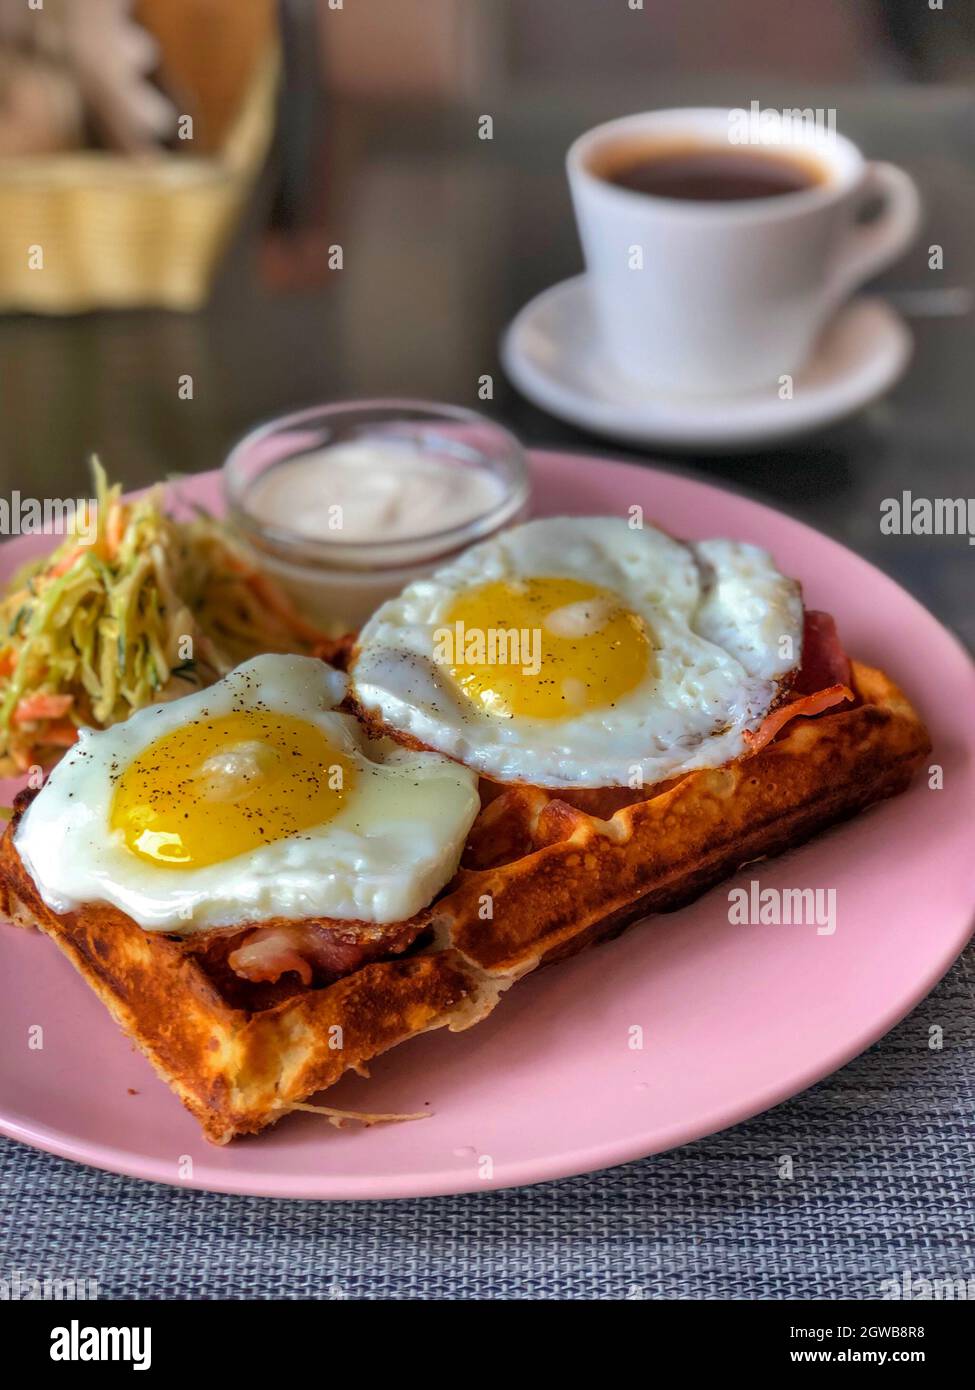 High Angle View Of Breakfast Served On Table Stock Photo